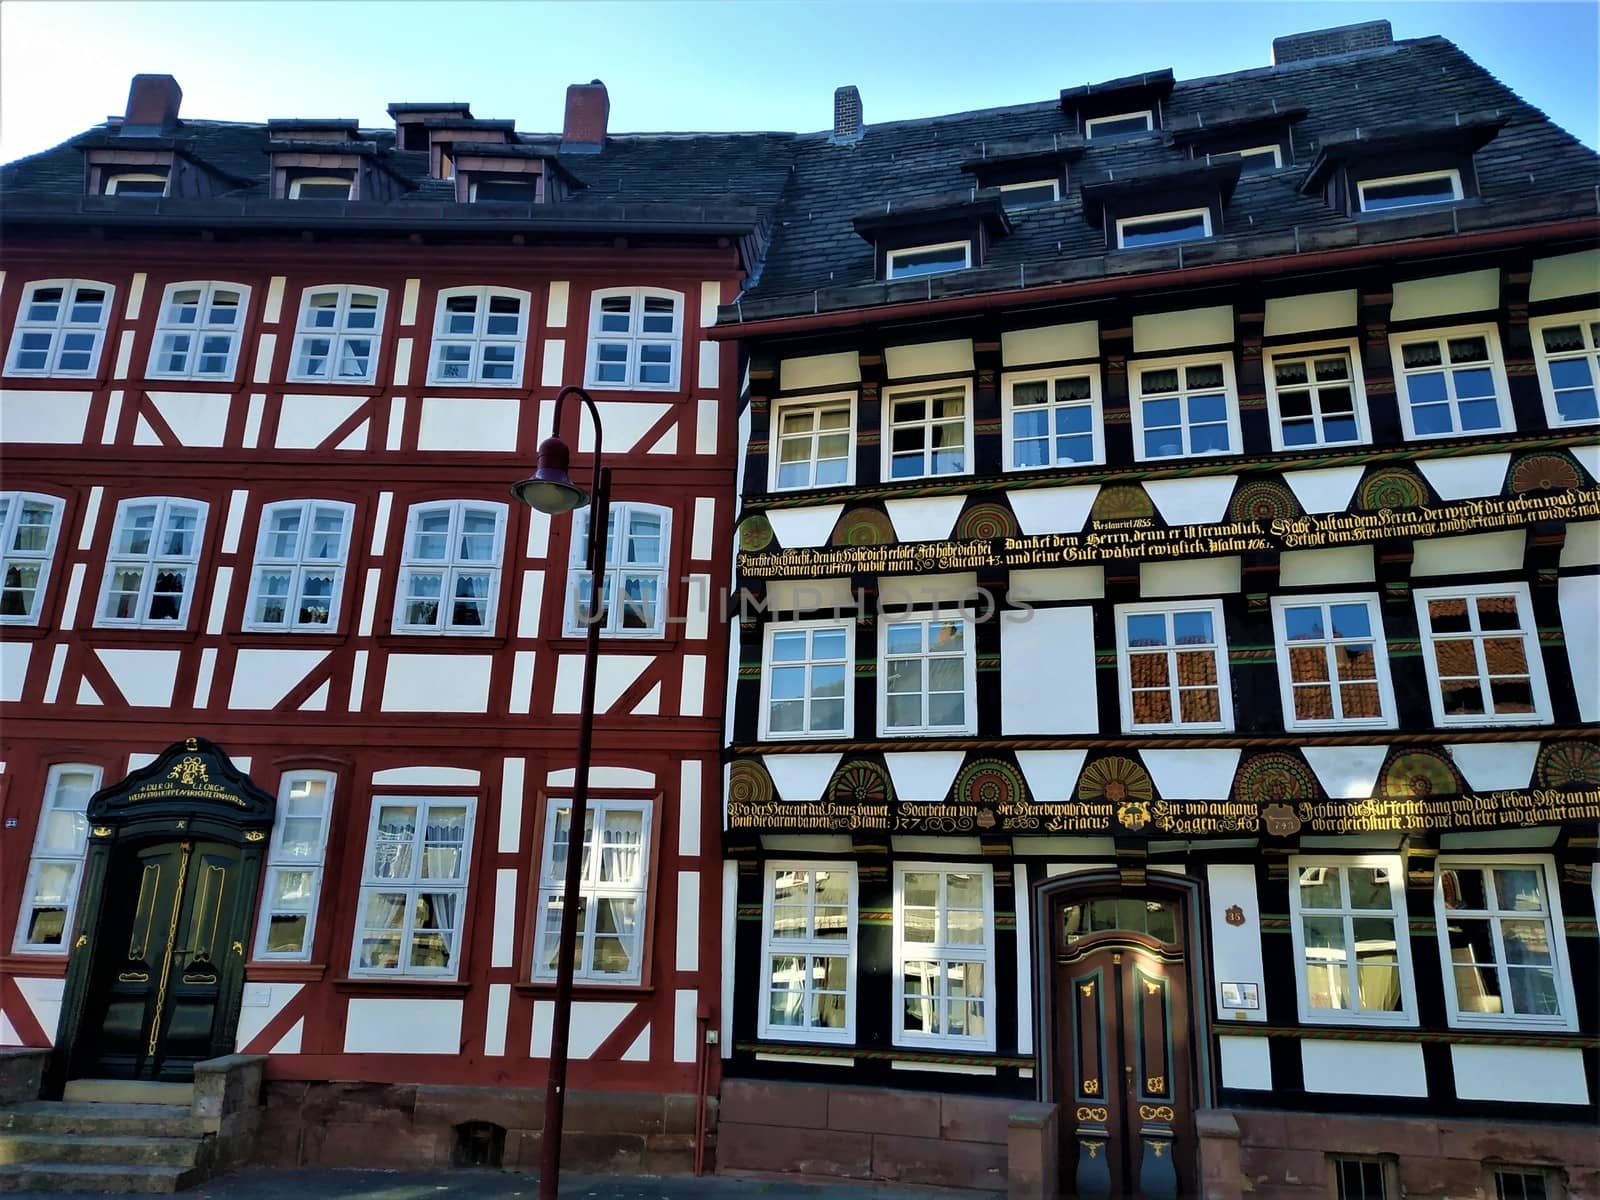 Beautiful half-timbered house in the old town of Einbeck, Germany